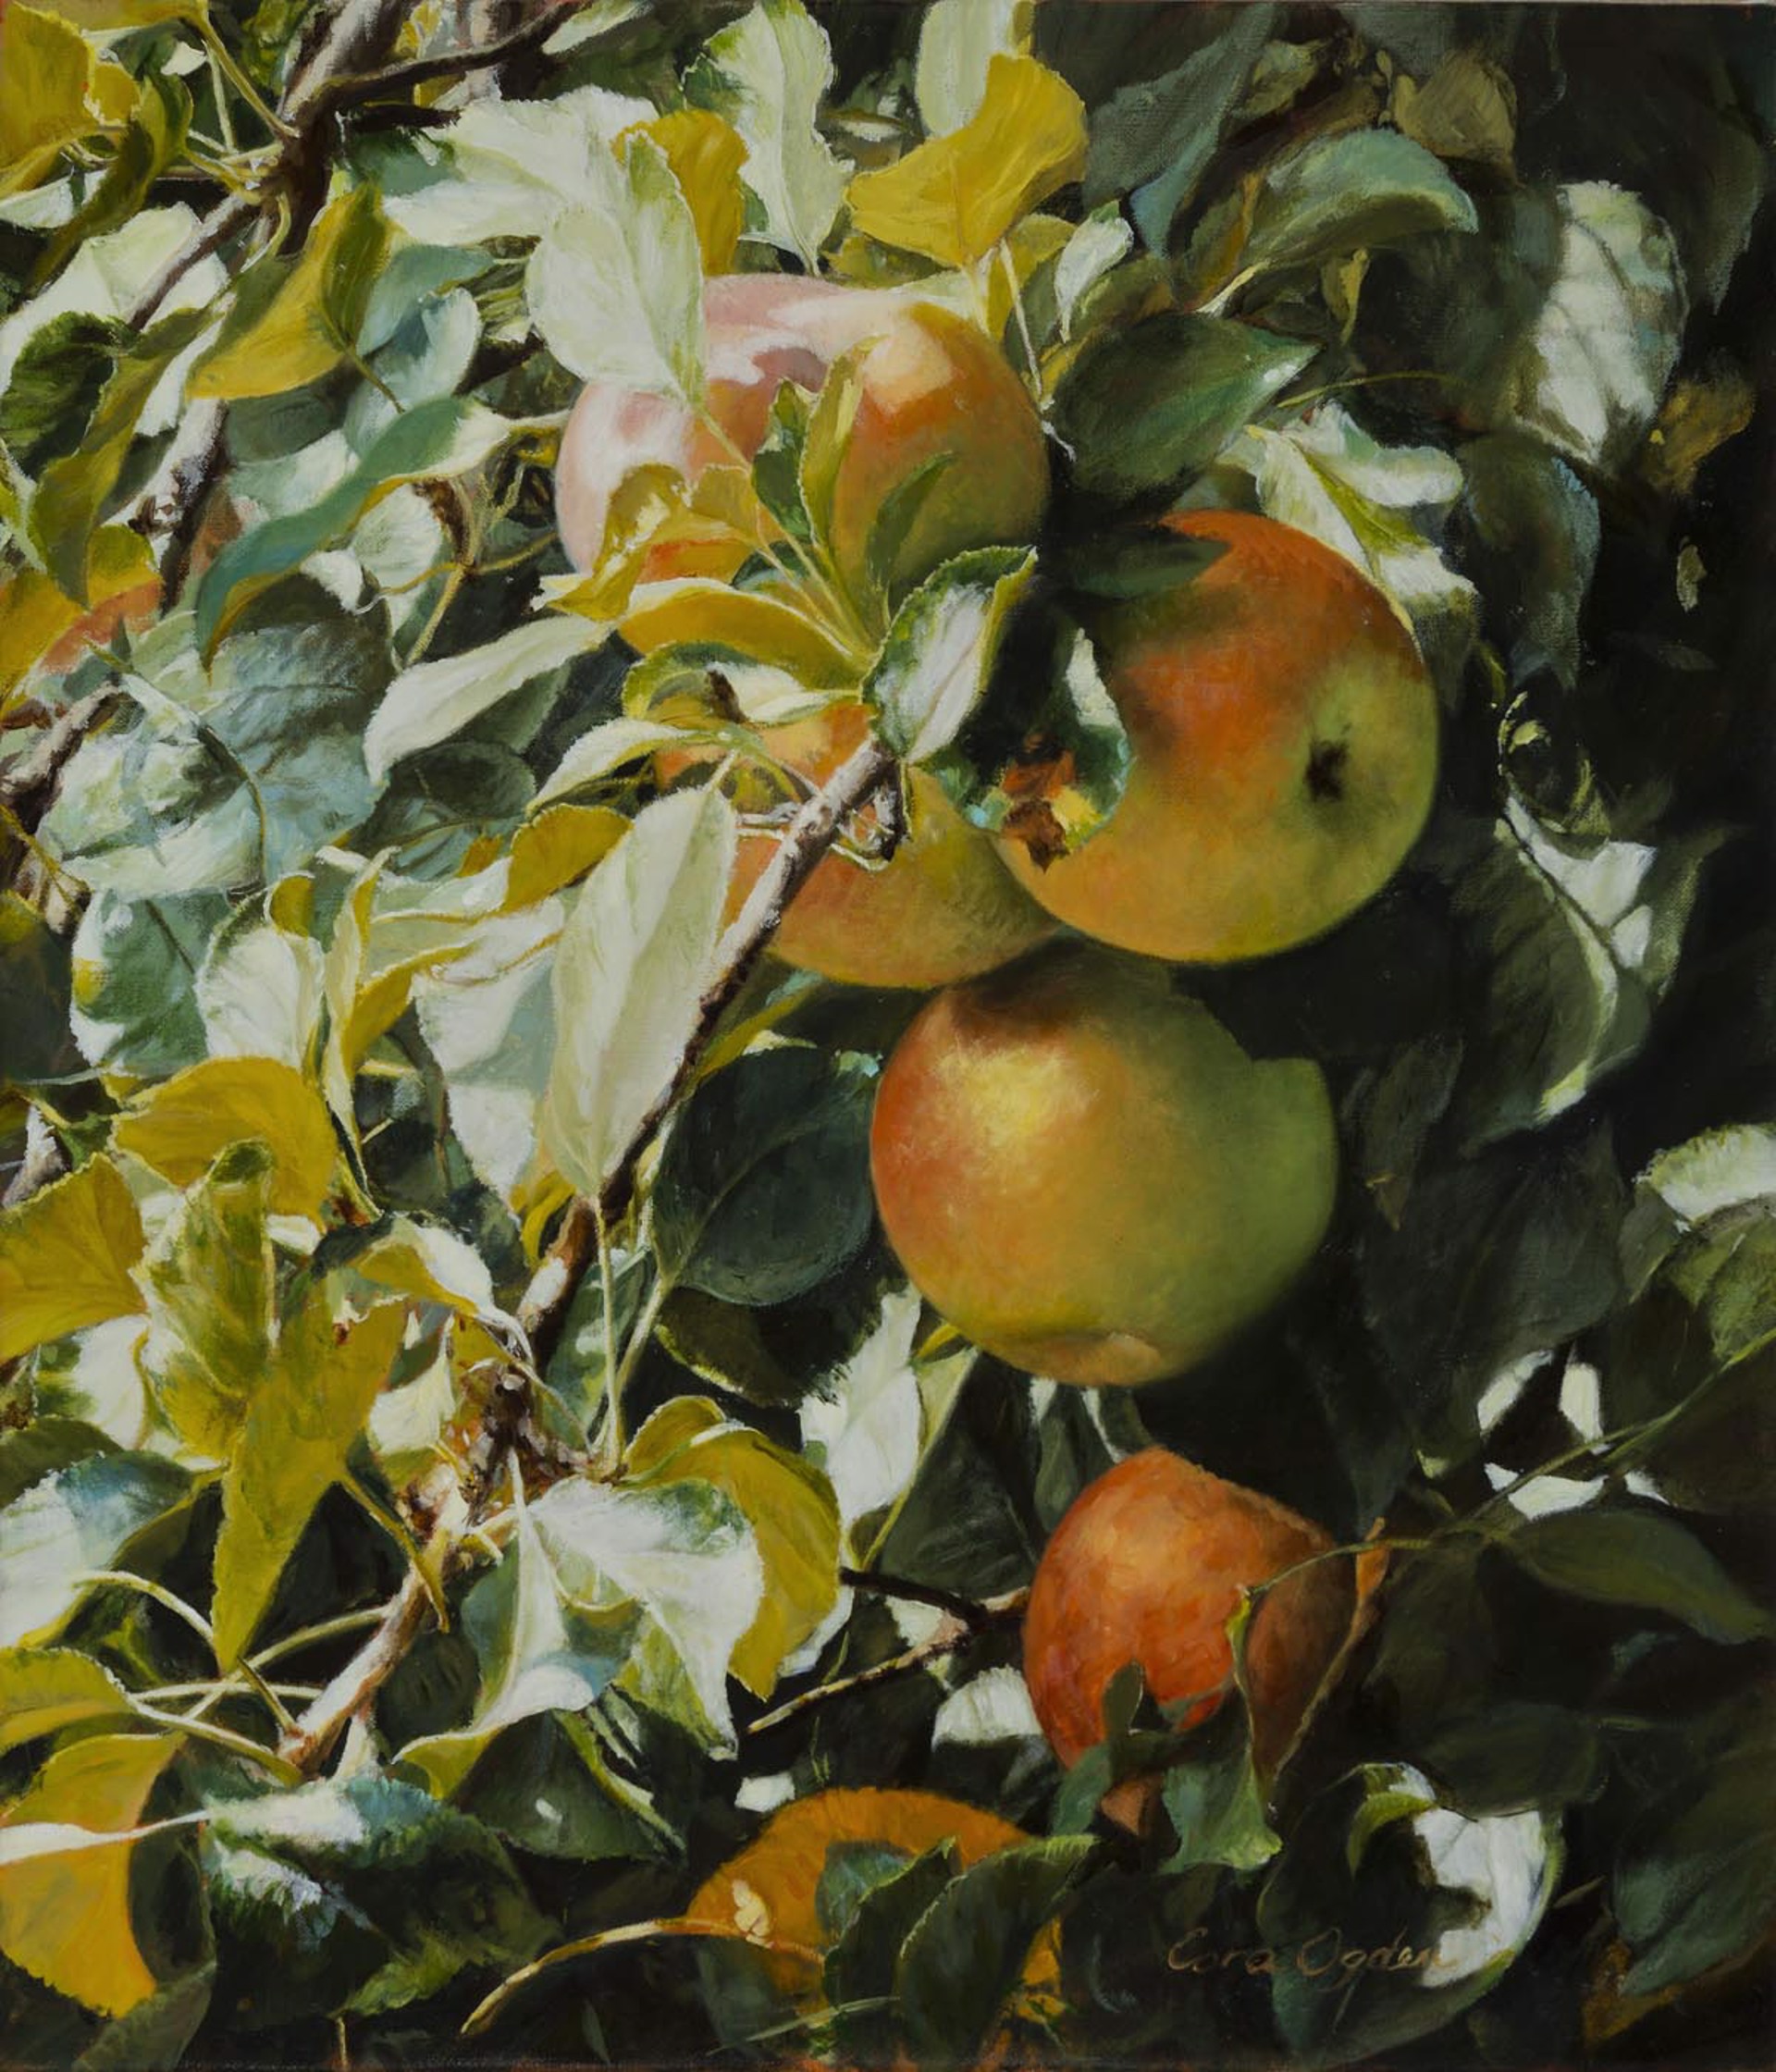 Late Summer Apples by Cora Ogden